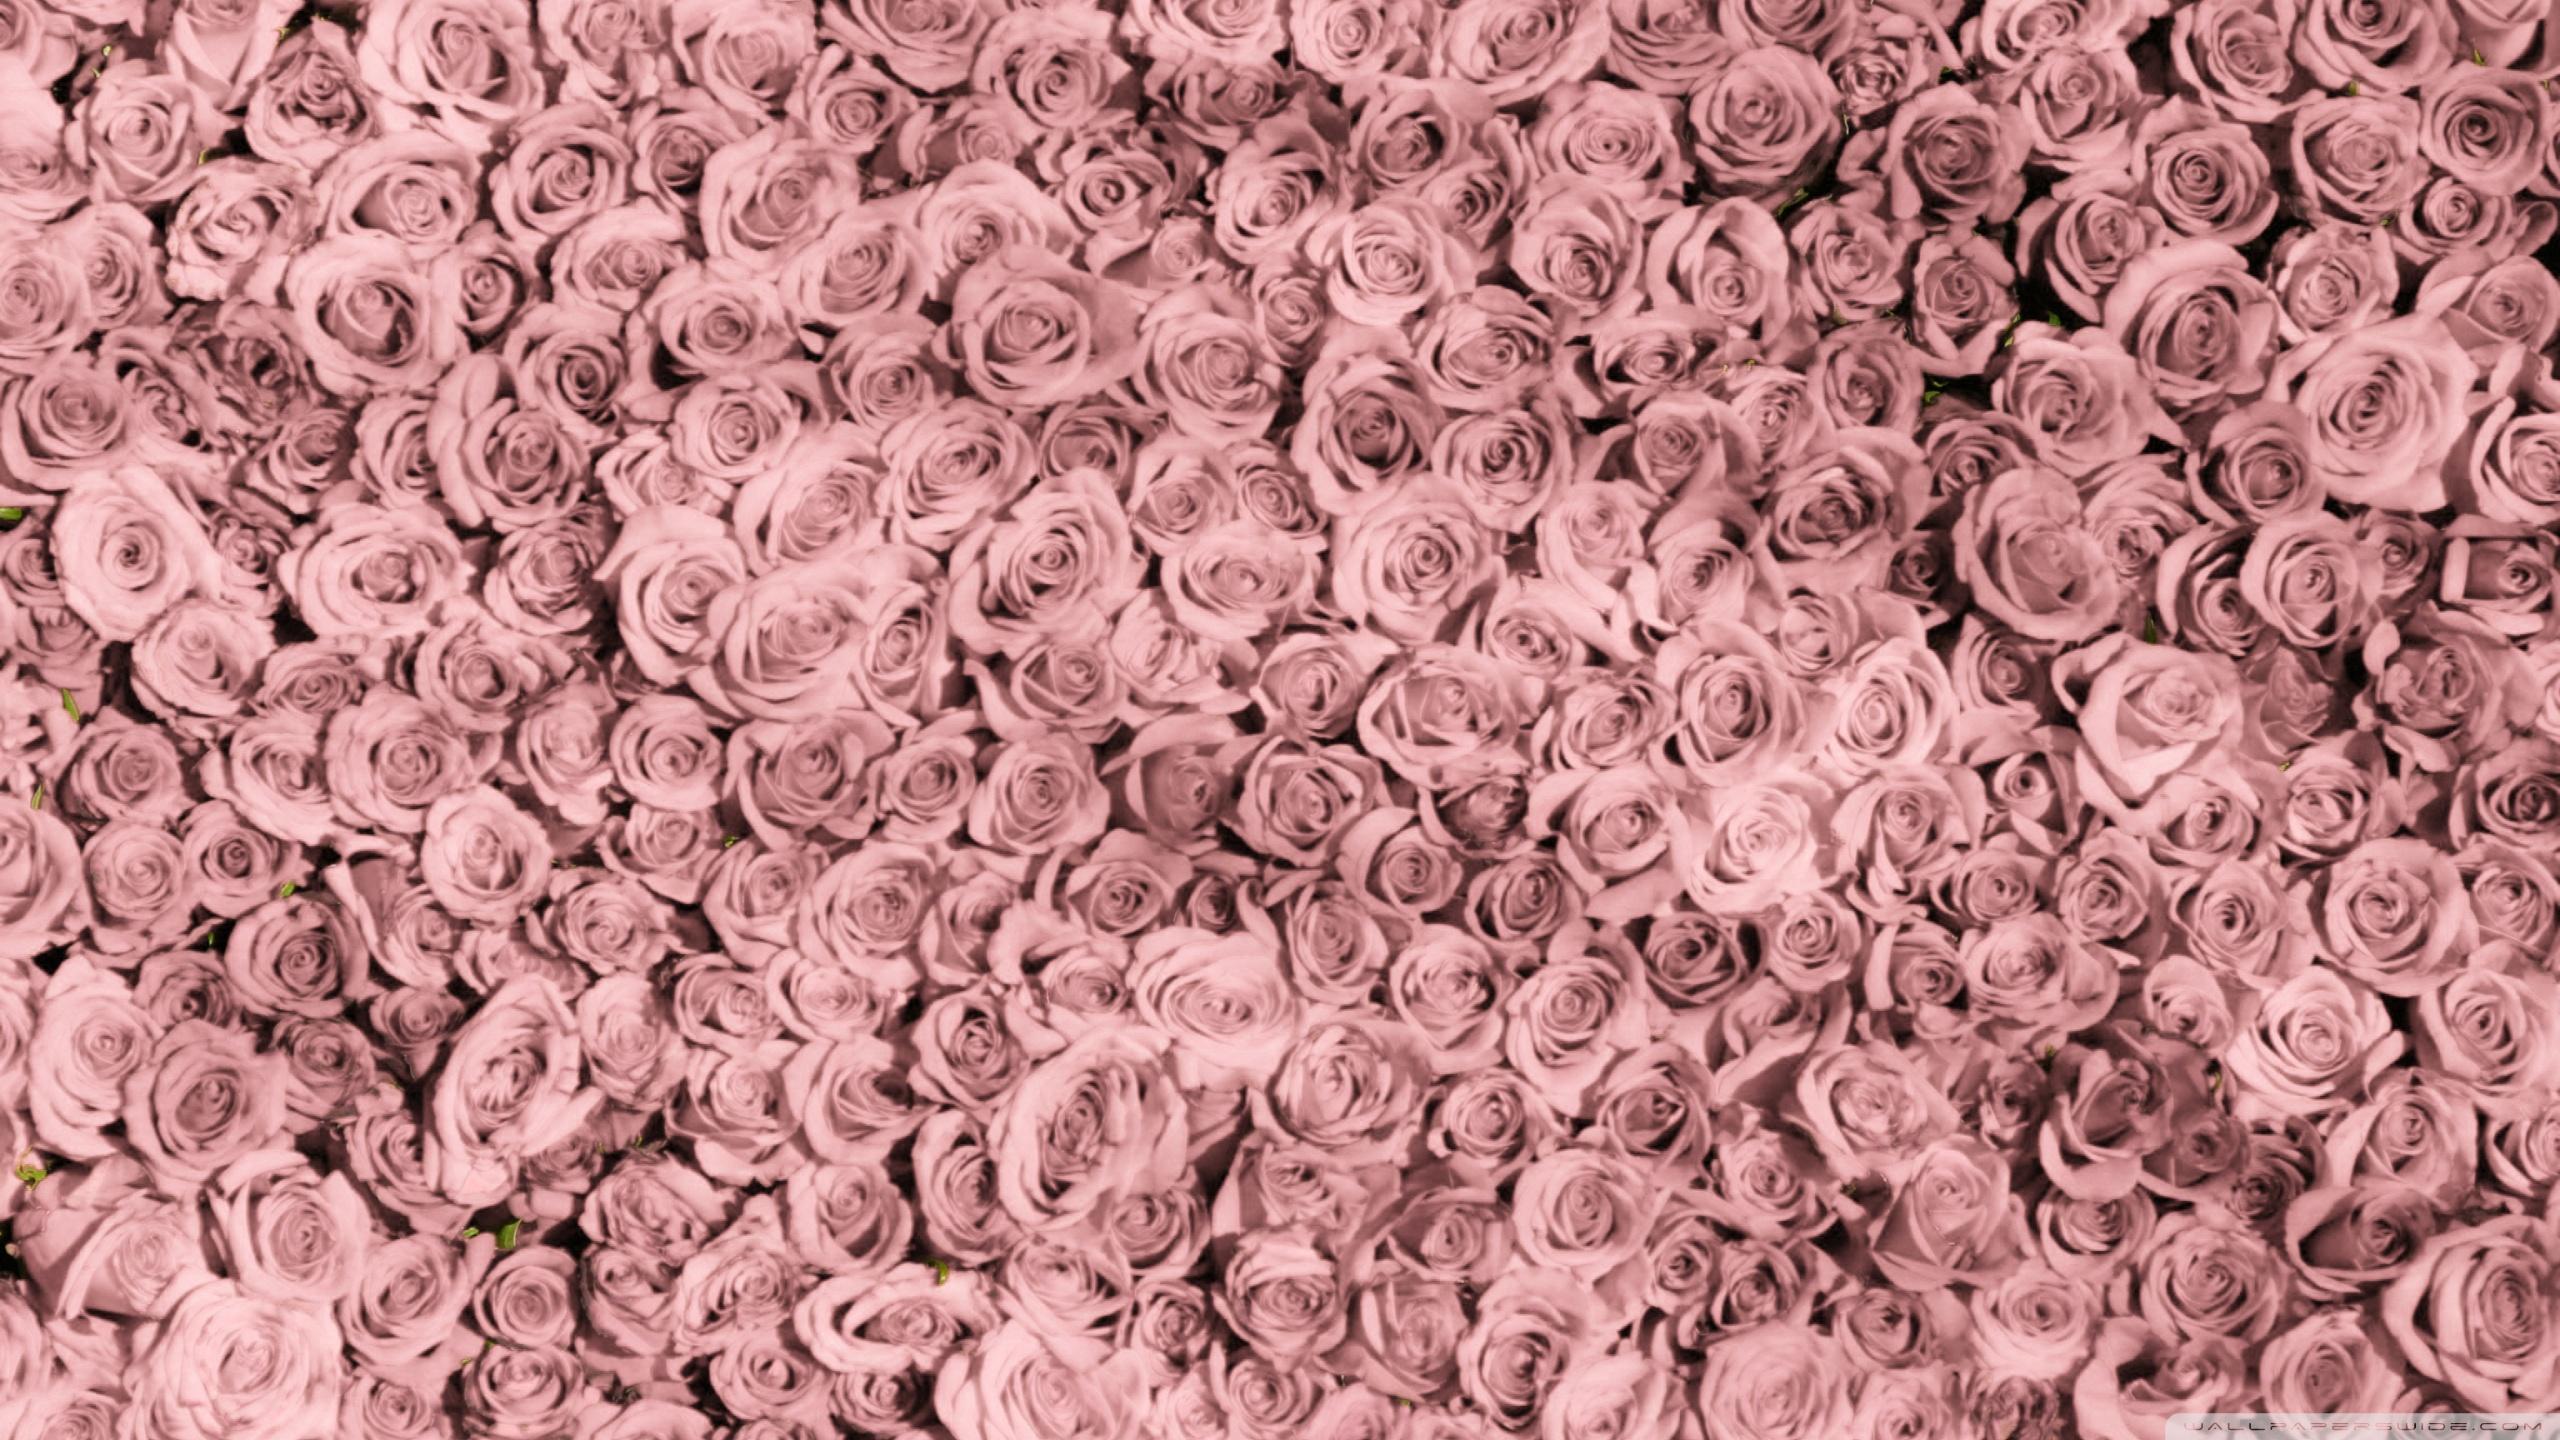 Rose Gold Aesthetic 2560x1440 Wallpapers On Wallpaperdog Rose gold aesthetic background laptop. rose gold aesthetic 2560x1440